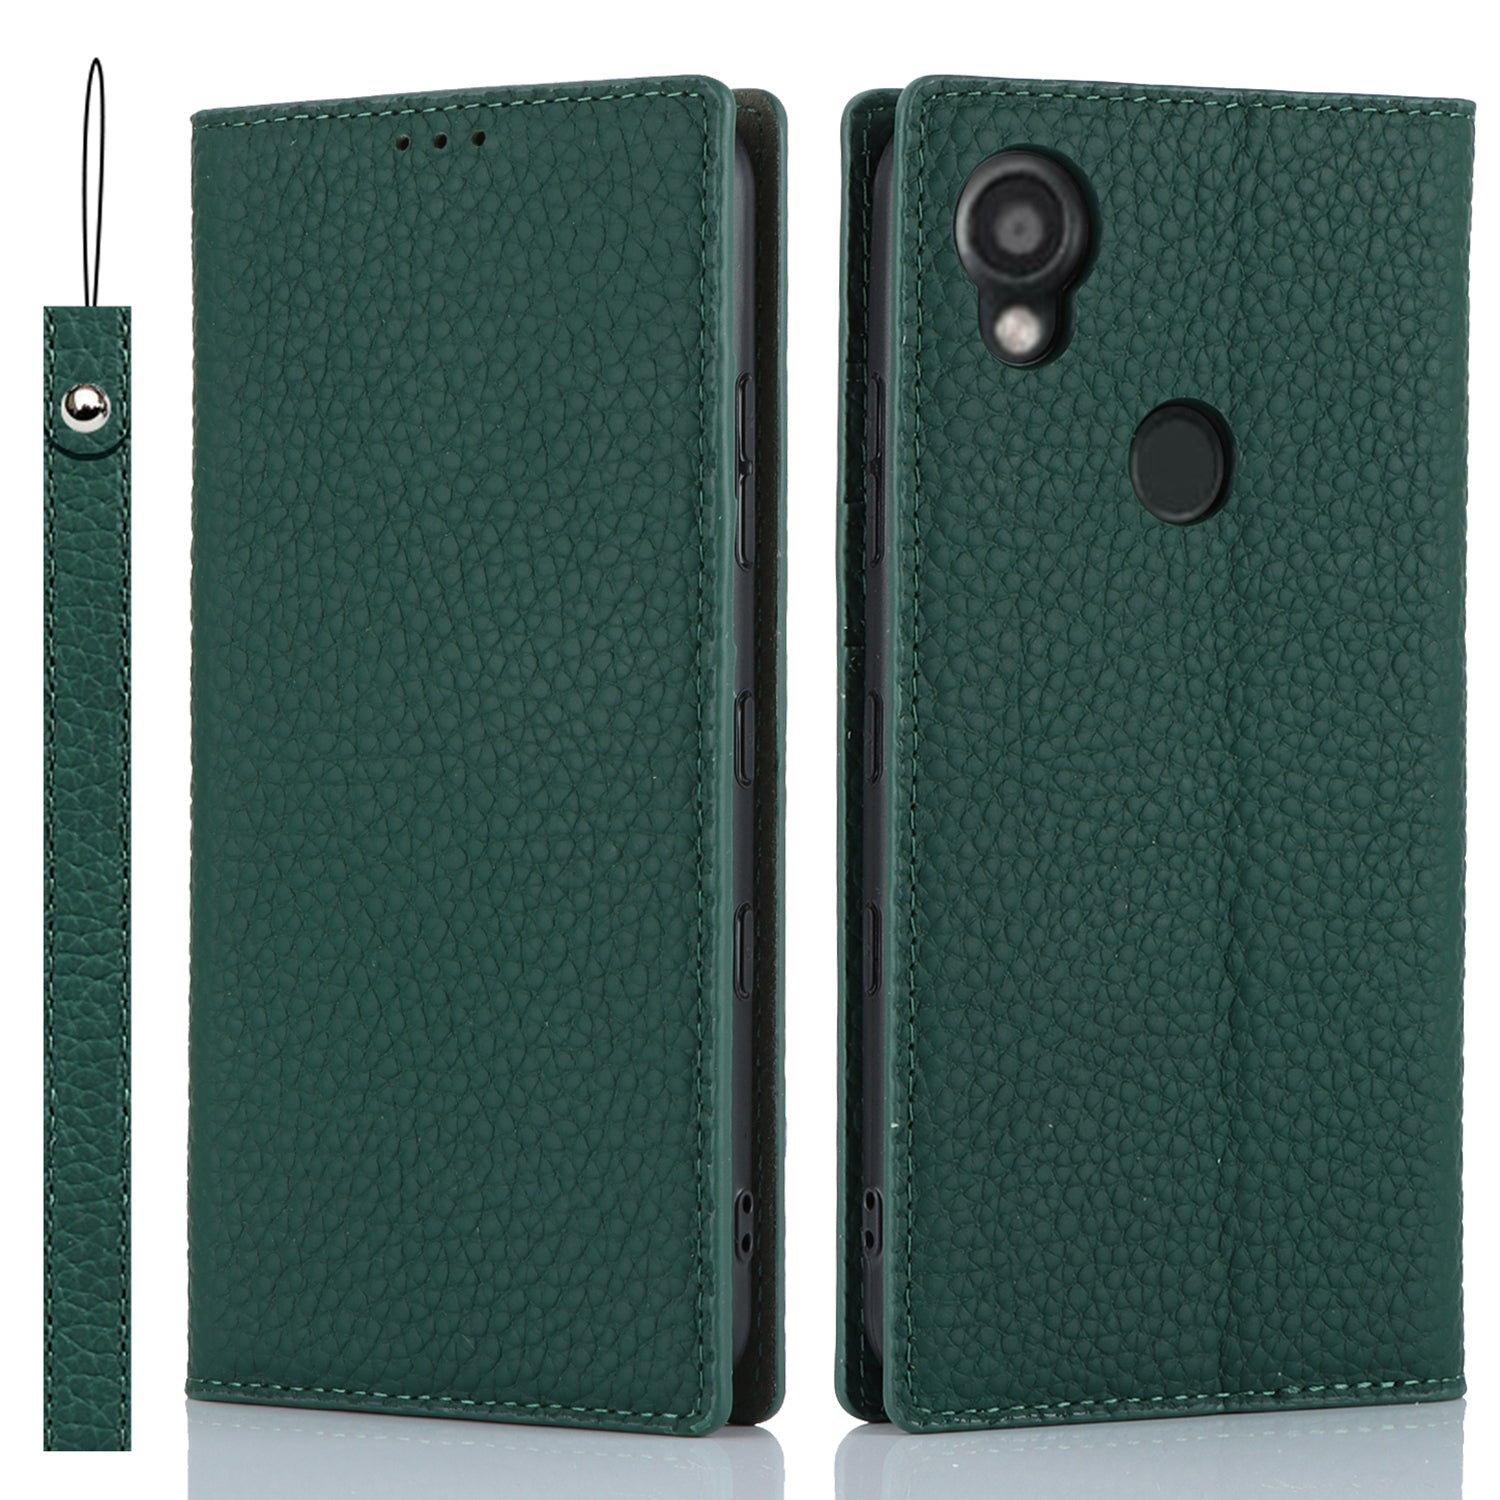 Wallet Cover for Kyocera Digno SX3 KYG02 Litchi Texture Genuine Cow Leather Phone Stand Case with Strap - Green